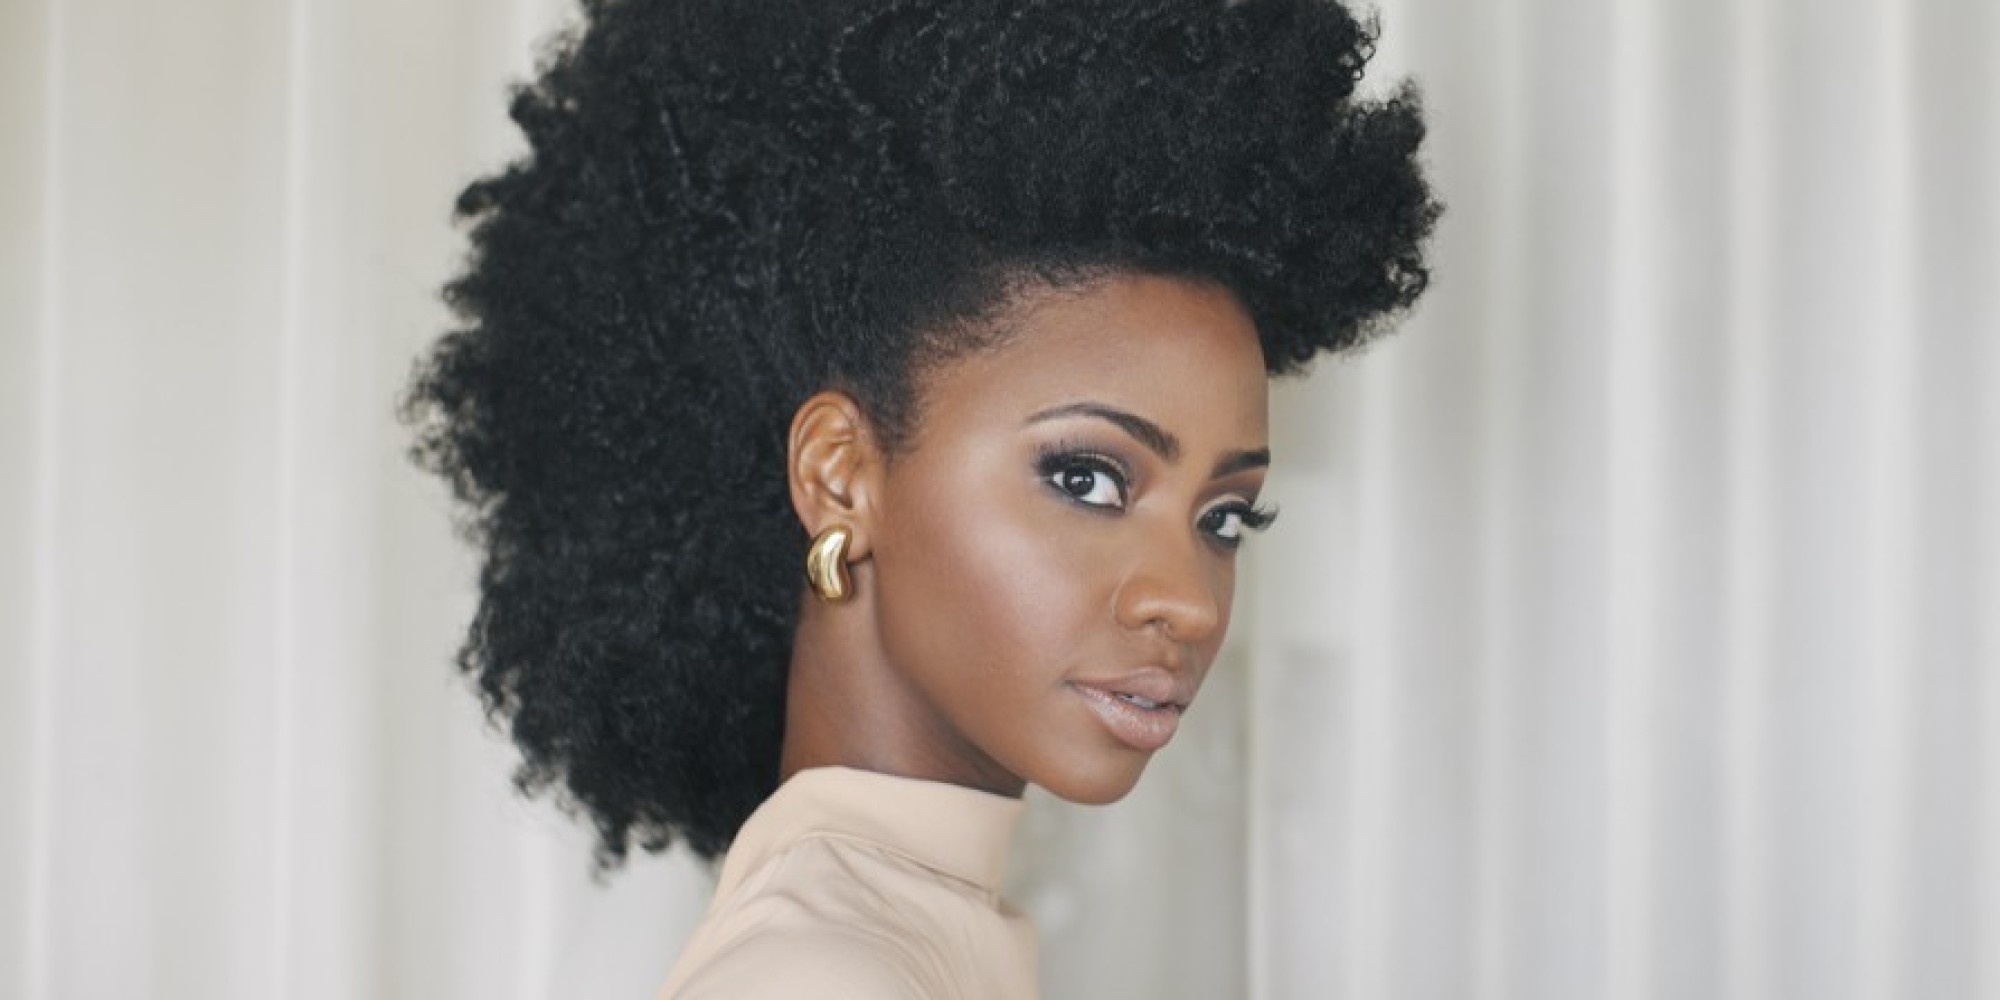 Teyonah Parris: A Natural Queen featured in Complex Mag 